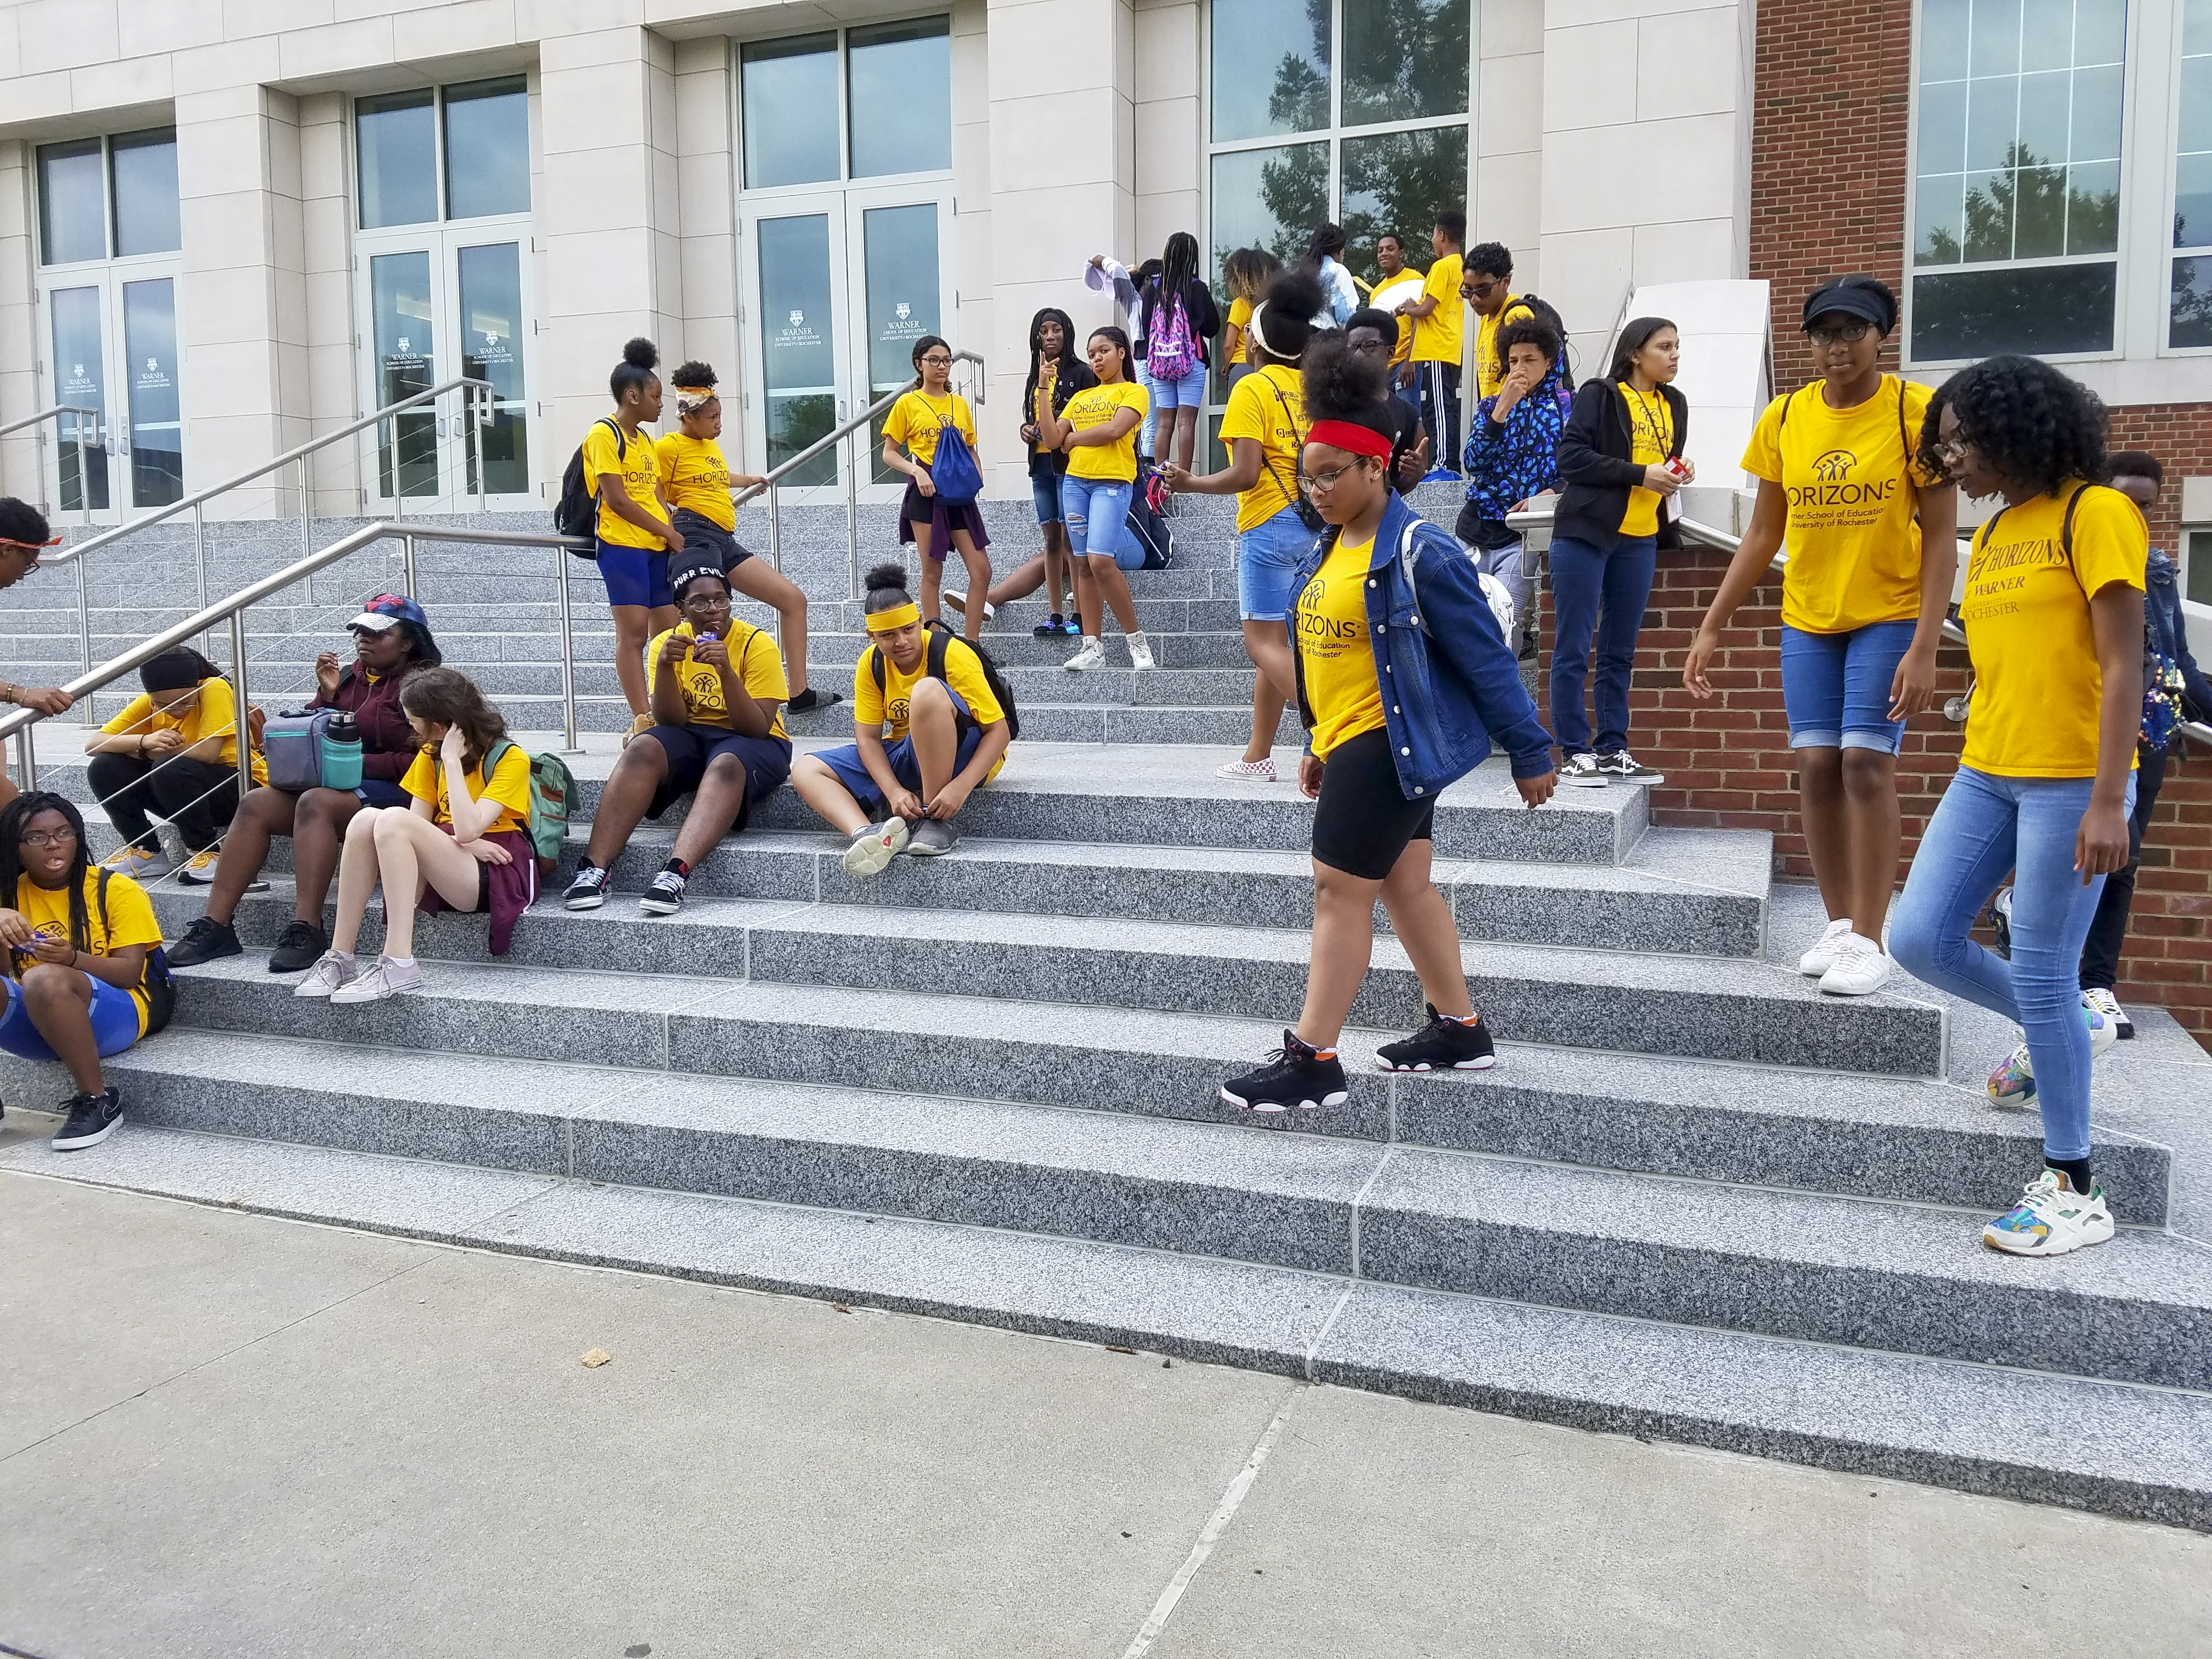 Horizons students in yellow tshirts mingling on the stairs in front og LeChase Hall before their field trip.